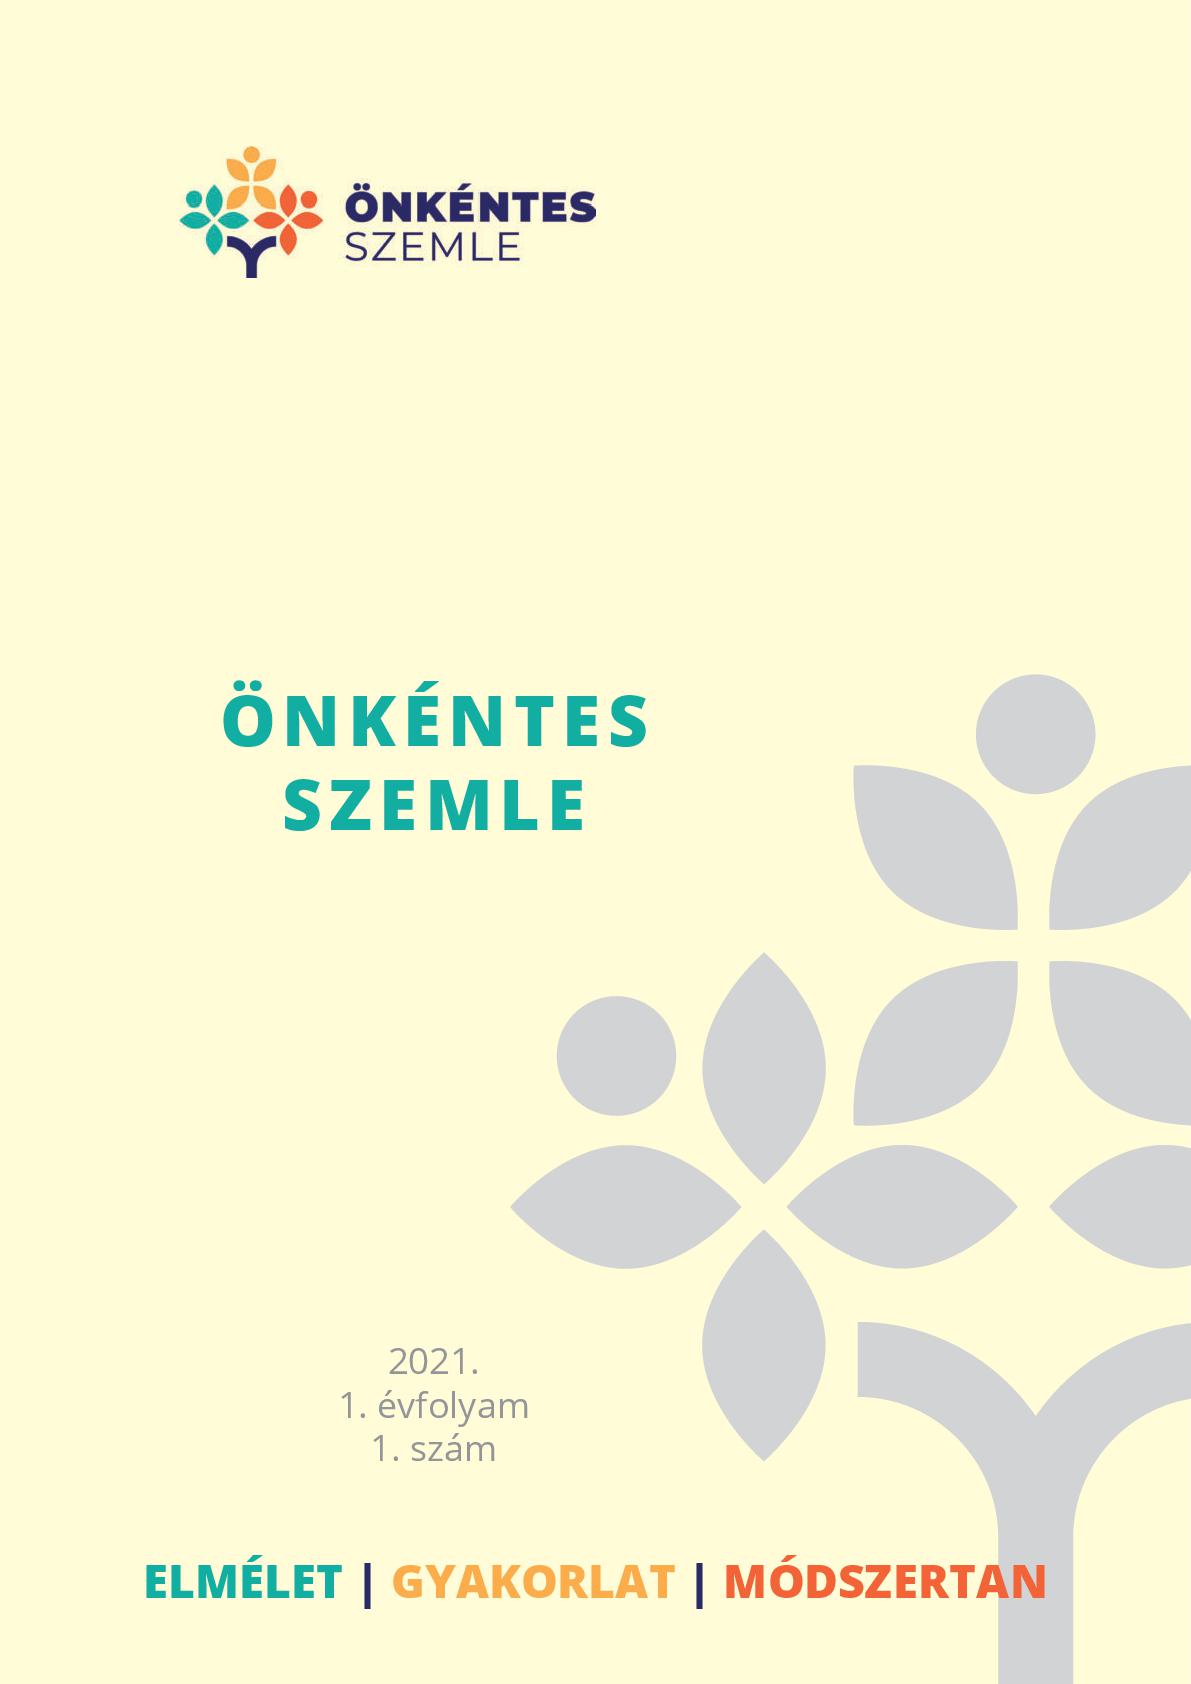 Formal and informal volunteering, according to the volunteering in Hungary 2018 survey Cover Image